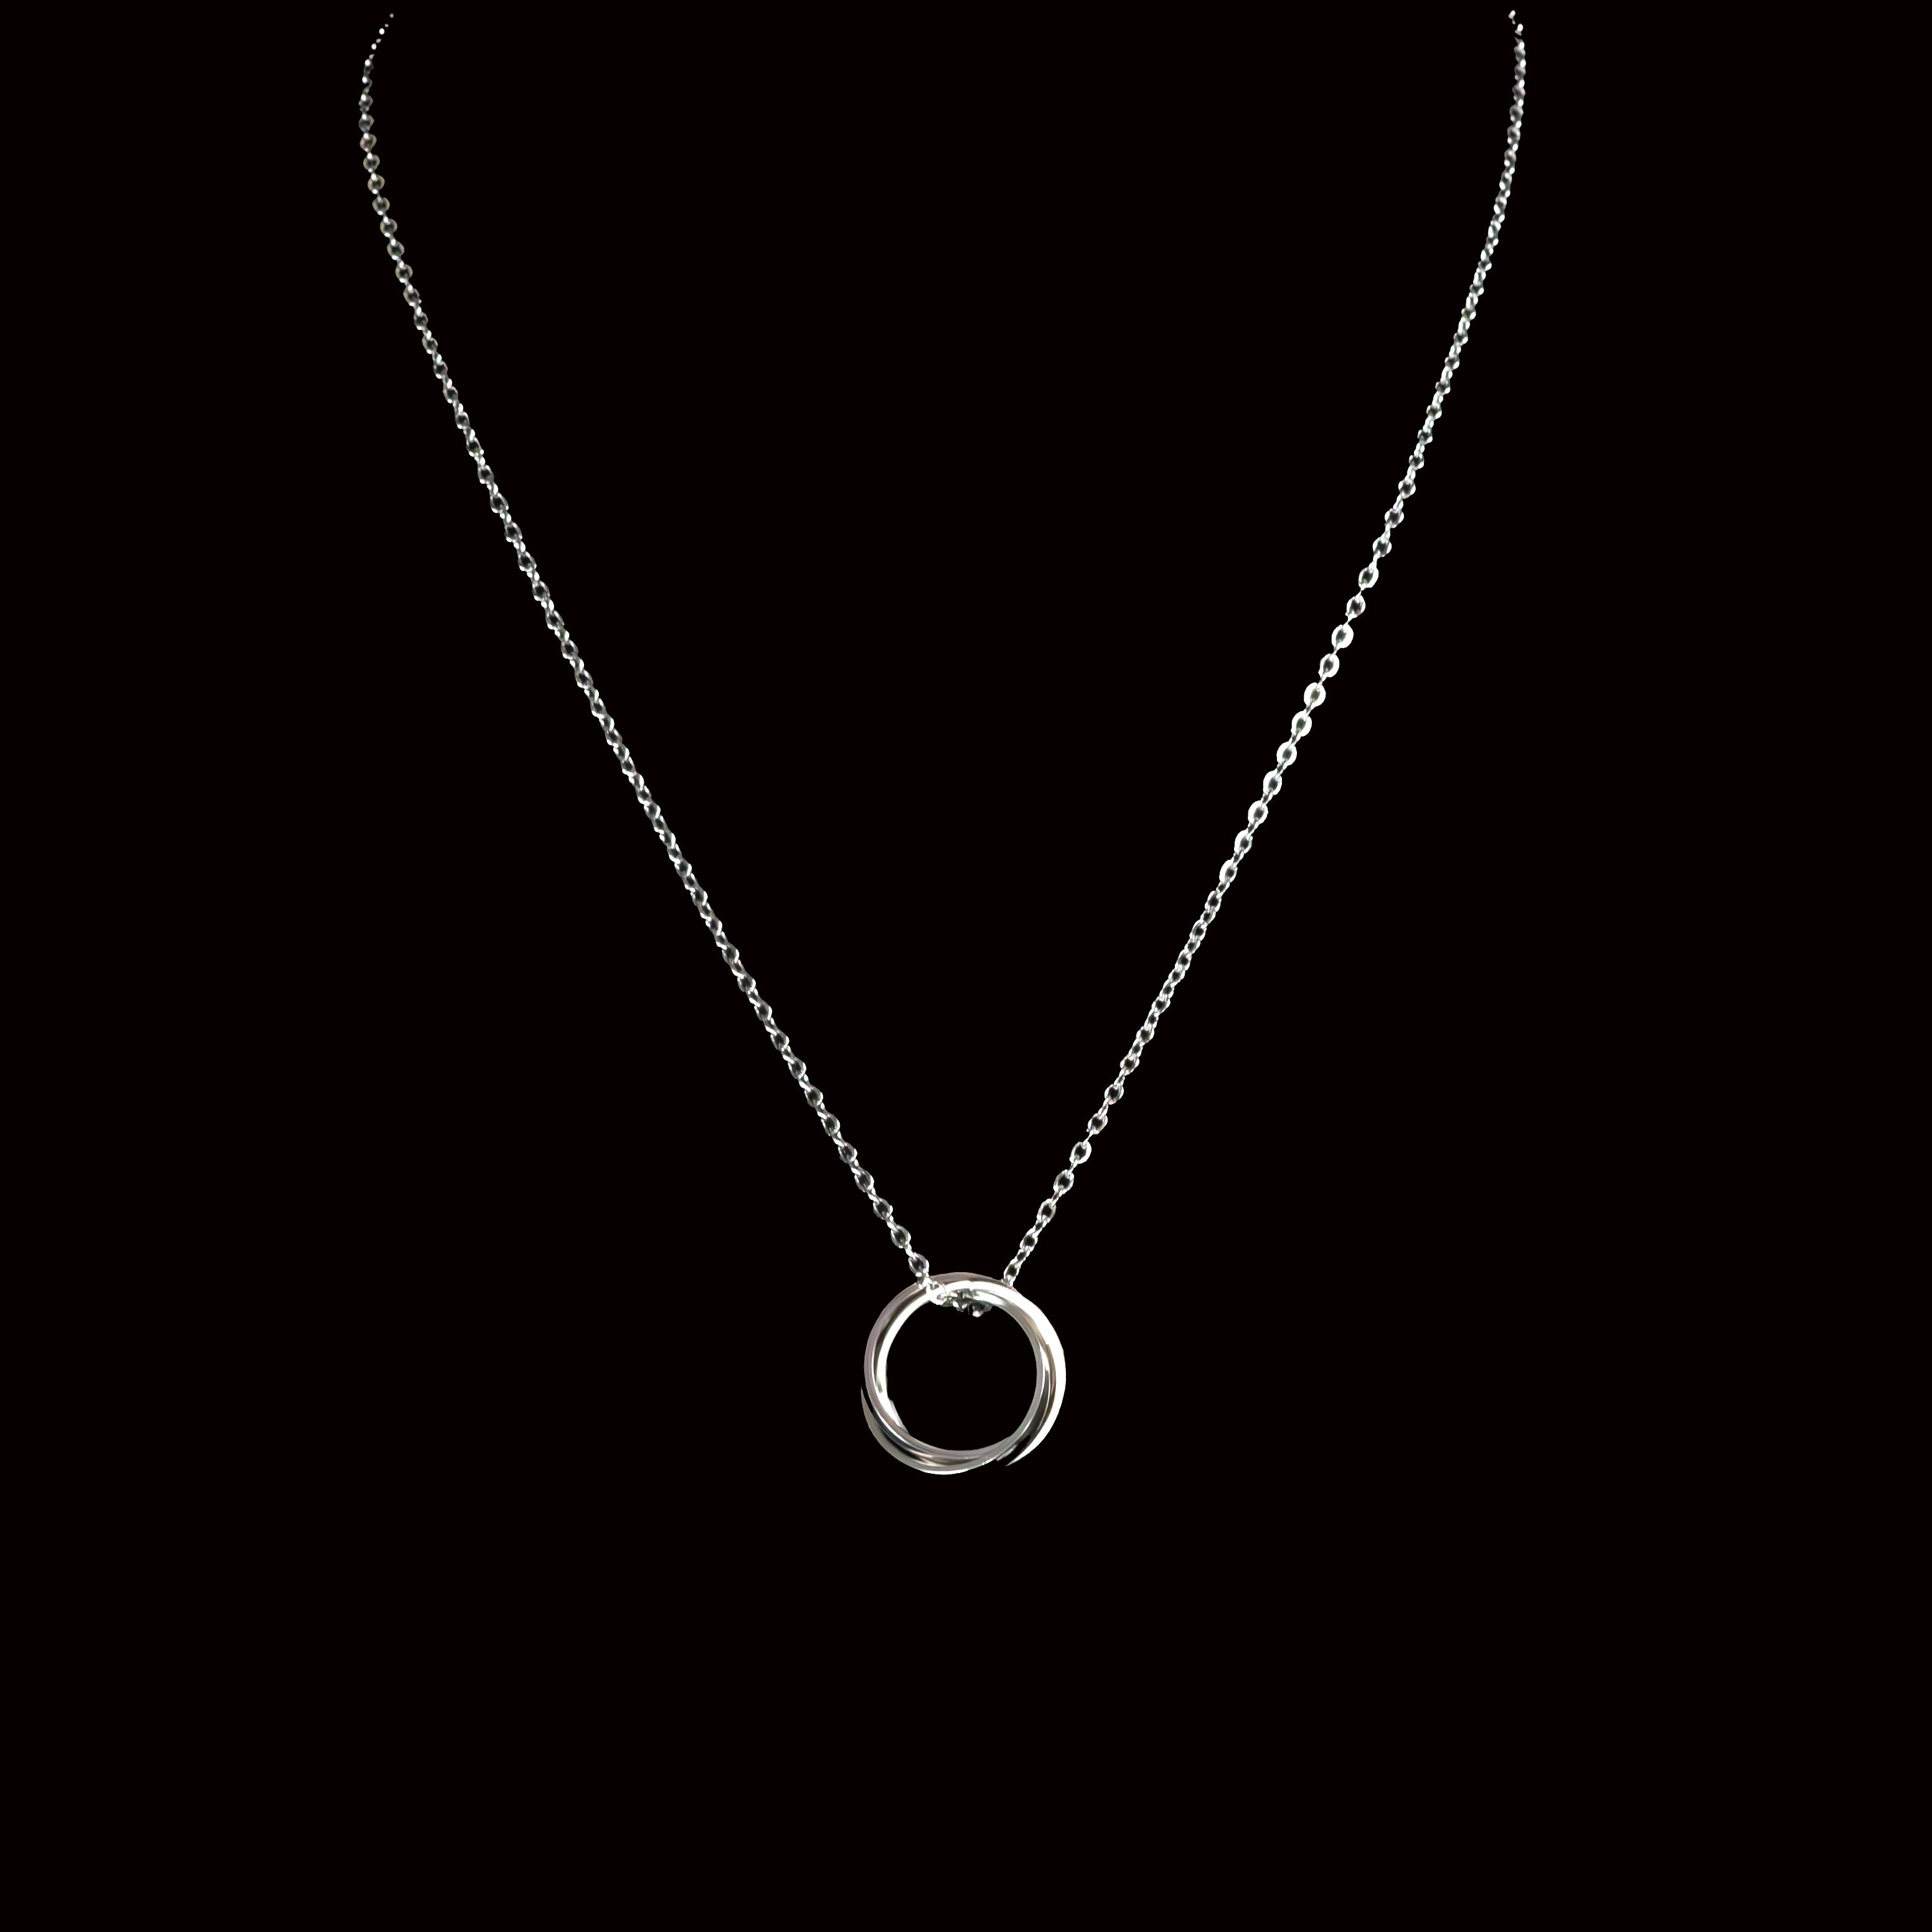 Ira Stainless Steel Necklace with Interlock Pendant